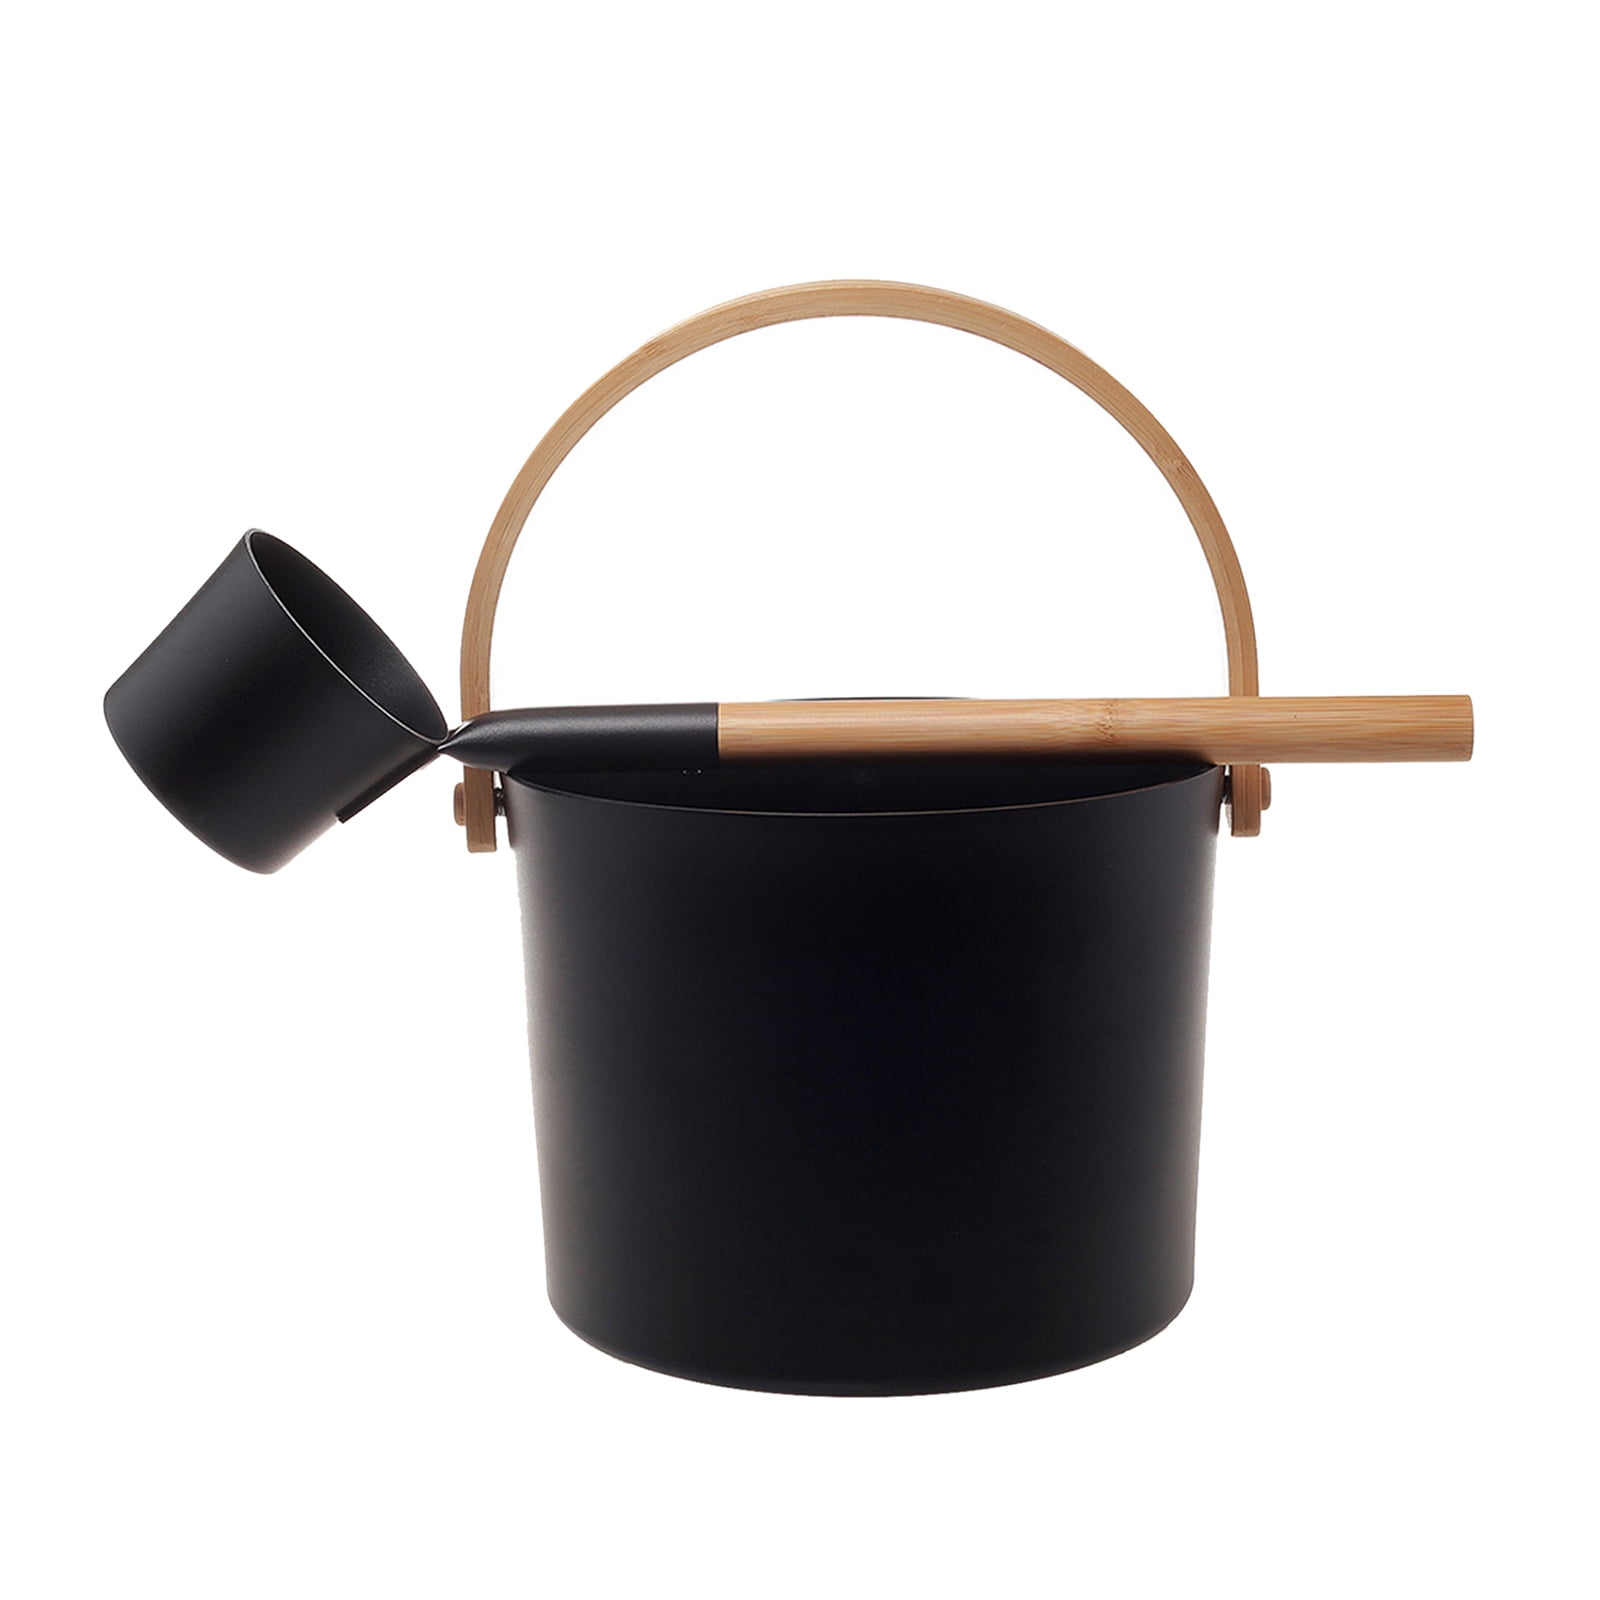 5L Capacity Russian Sauna Bucket with Matching Laddle Spoon Sauna Accessories 